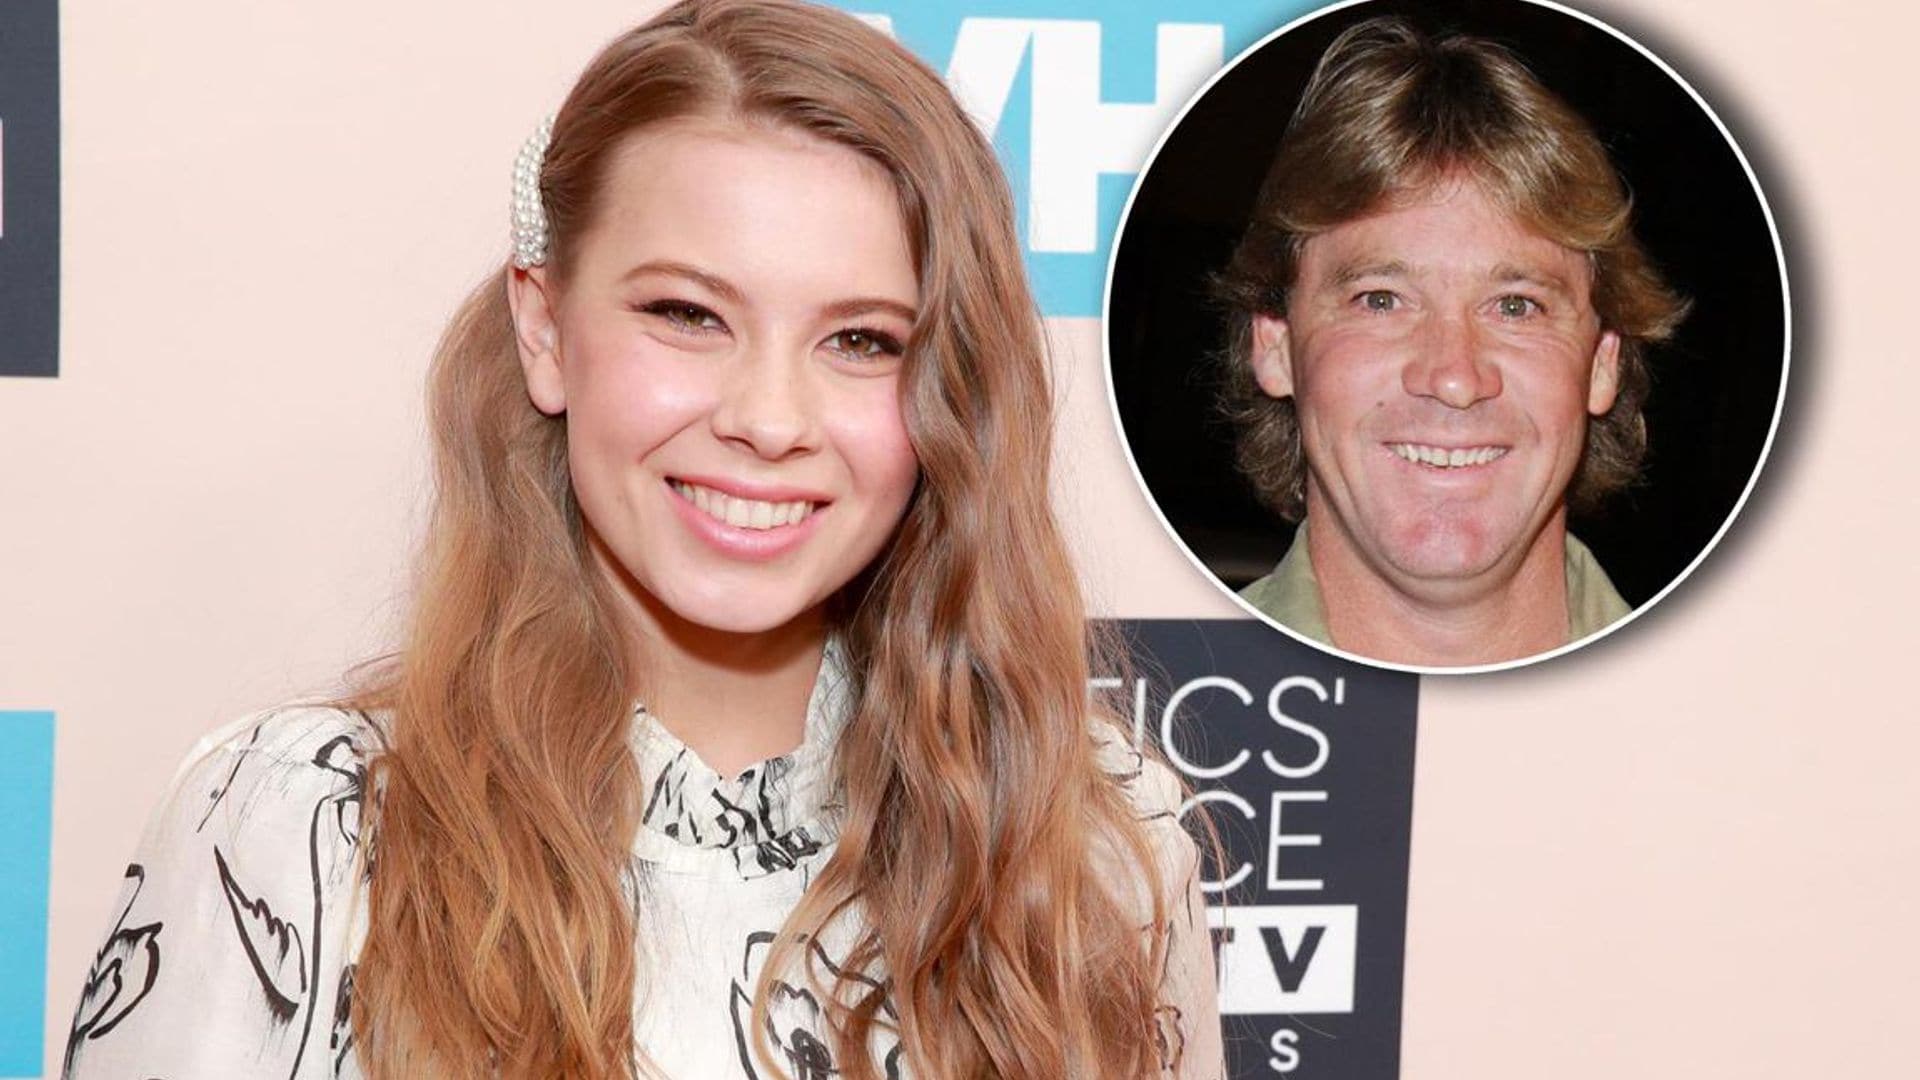 Bindi Irwin’s late father Steve Irwin ‘would be so proud’ of daughter becoming a mom